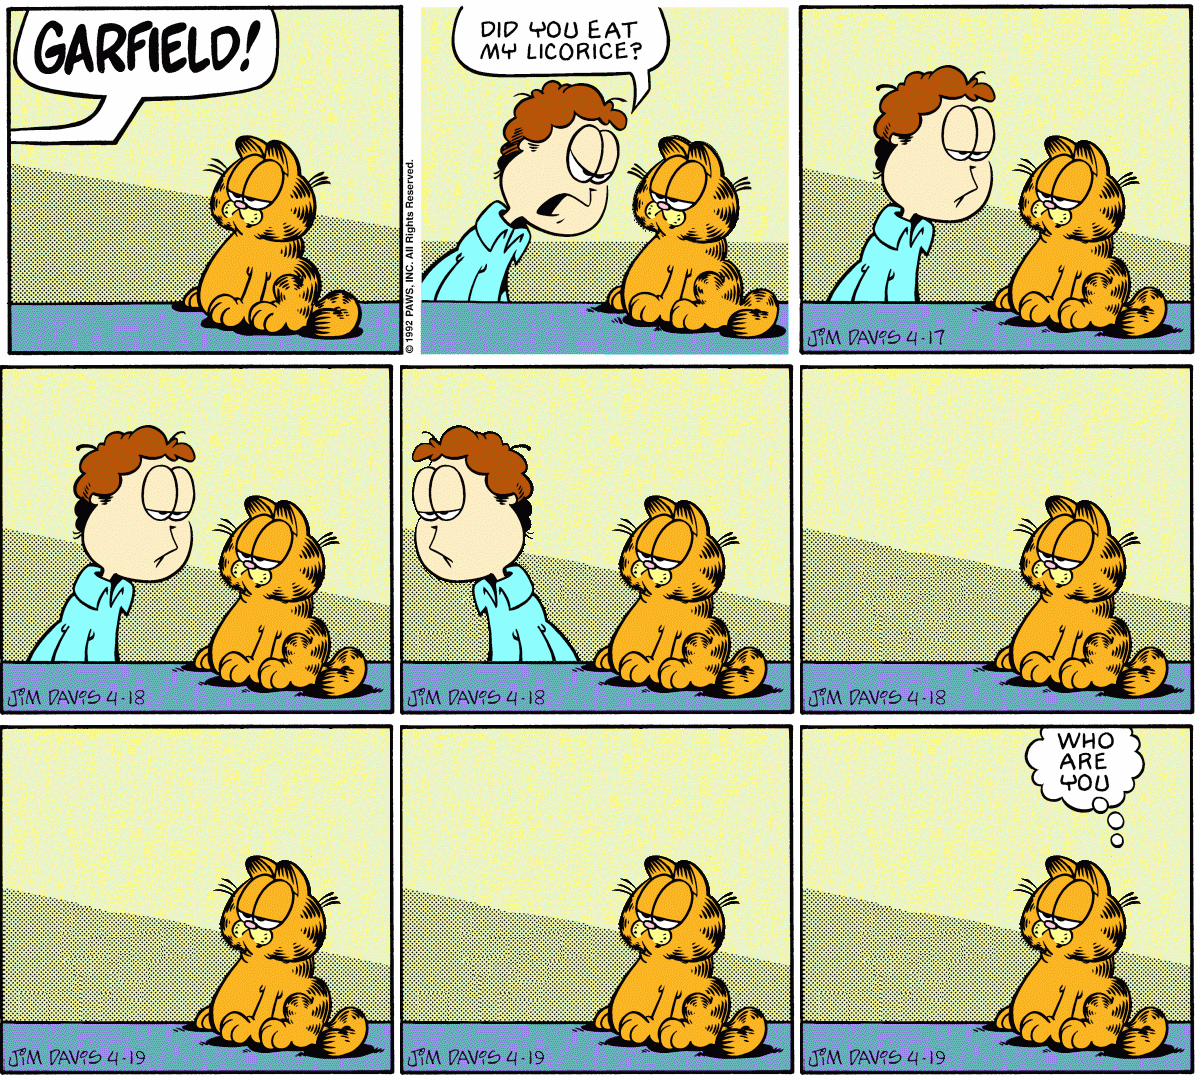 Garfield for the Modern Age (A Retrospective on the Cartoon Life of a Thinking Housecat): Act I